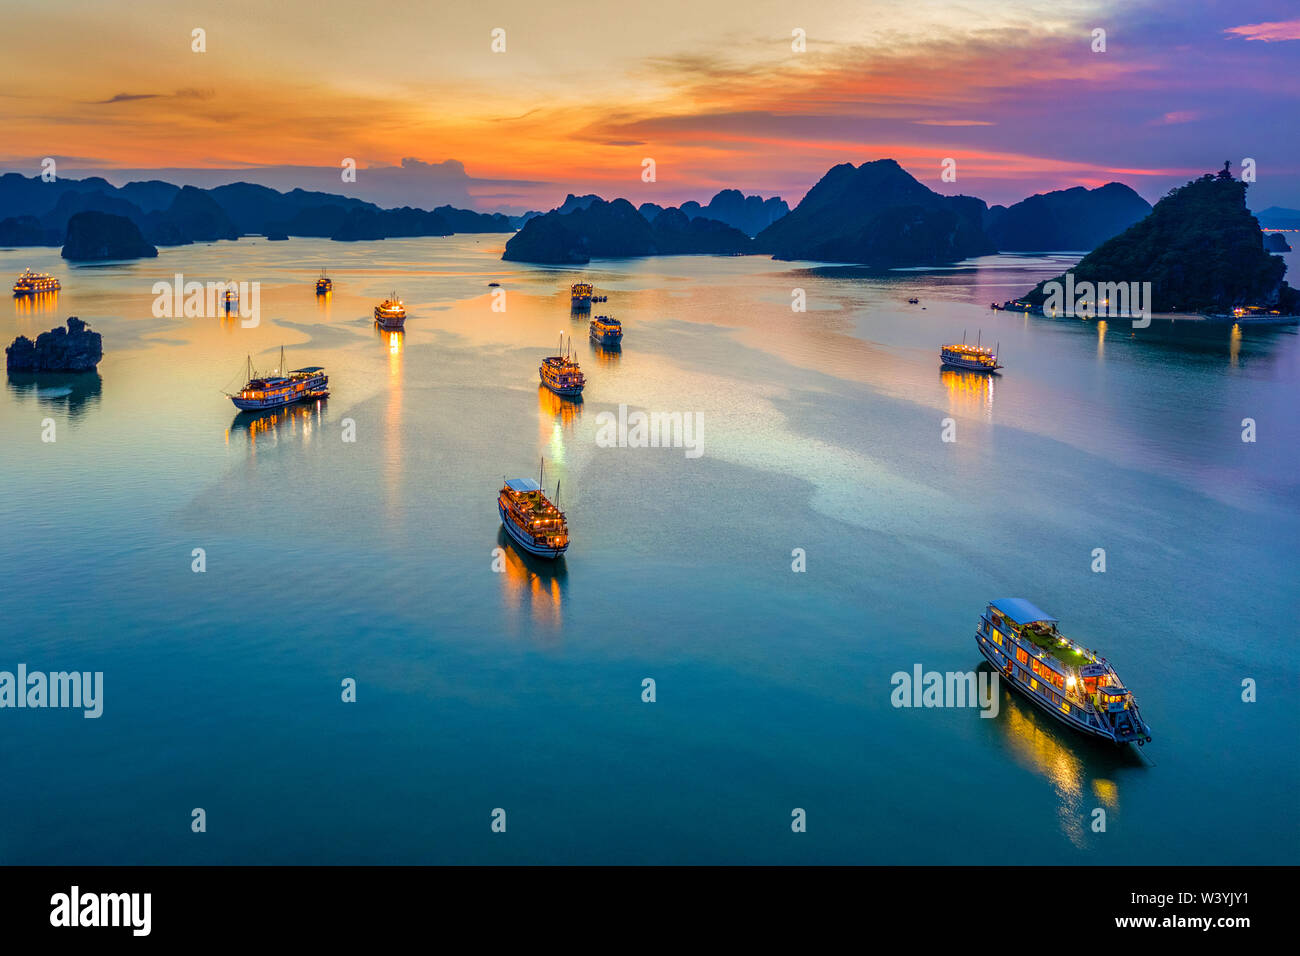 Aerial view of sunset, dawn near Ti Top rock island, Halong Bay, Vietnam, Southeast Asia. UNESCO World Heritage Site. Junk boat cruise to Ha Long Bay. Stock Photo